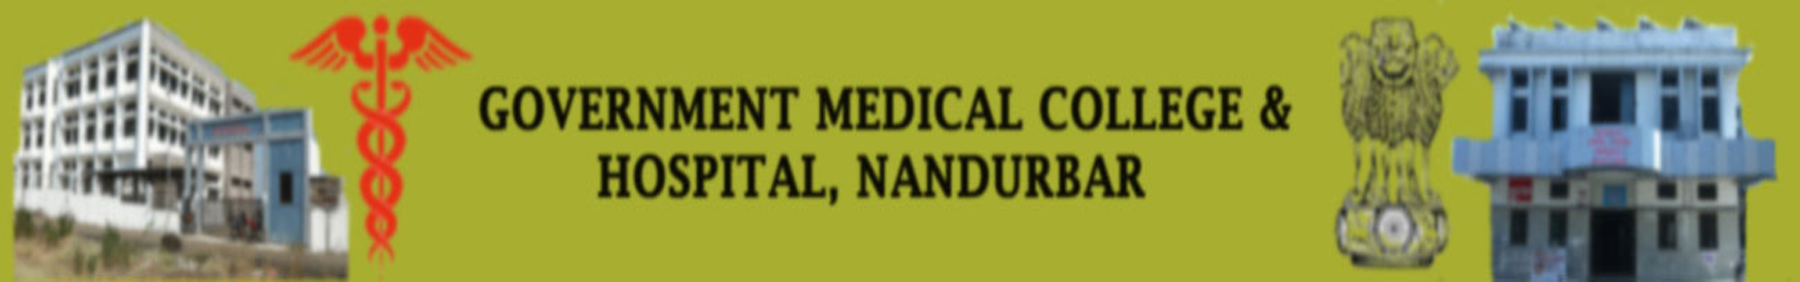 Government Medical College and hospital, Nandurbar